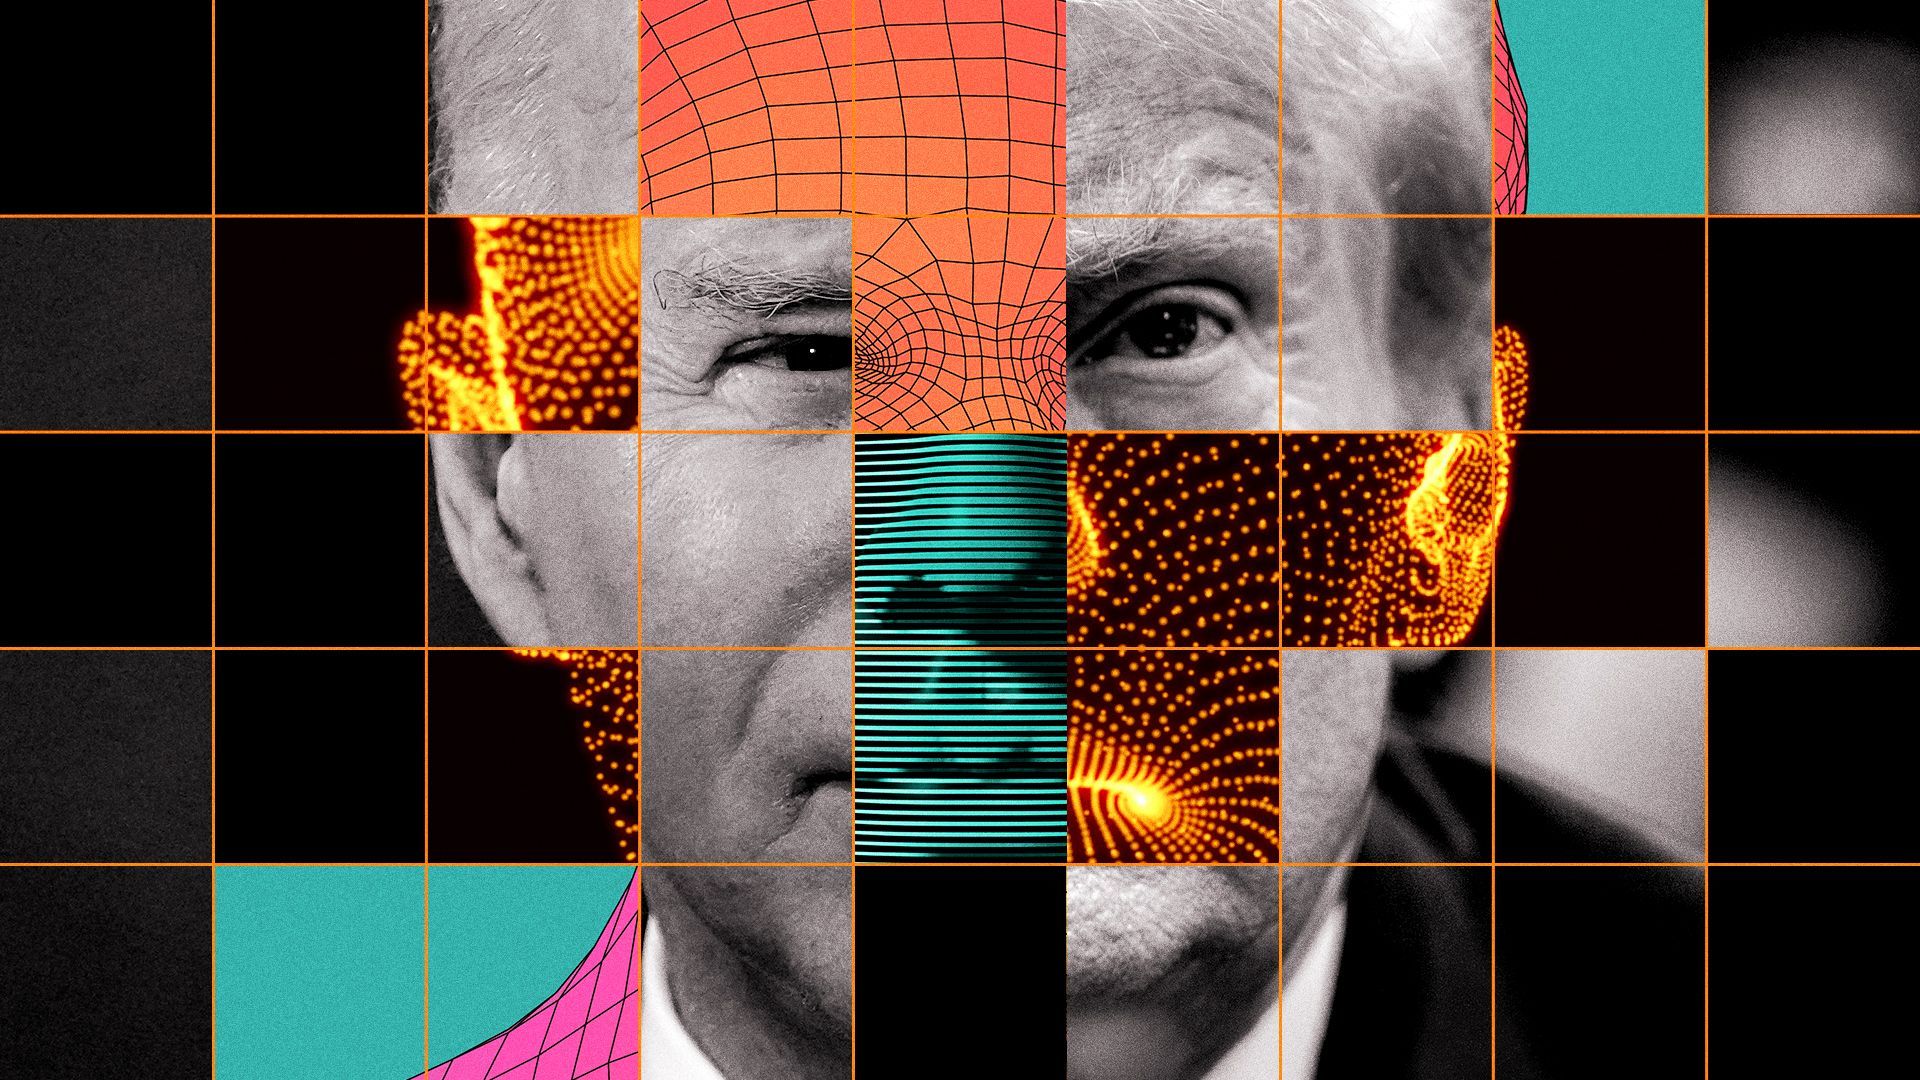 Photo illustration of a grid of images laid out to form one human face, comprising of smaller squares of both Biden and Trump's features, as well as wireframe and gridded illustrated forms of an electronically depicted face.